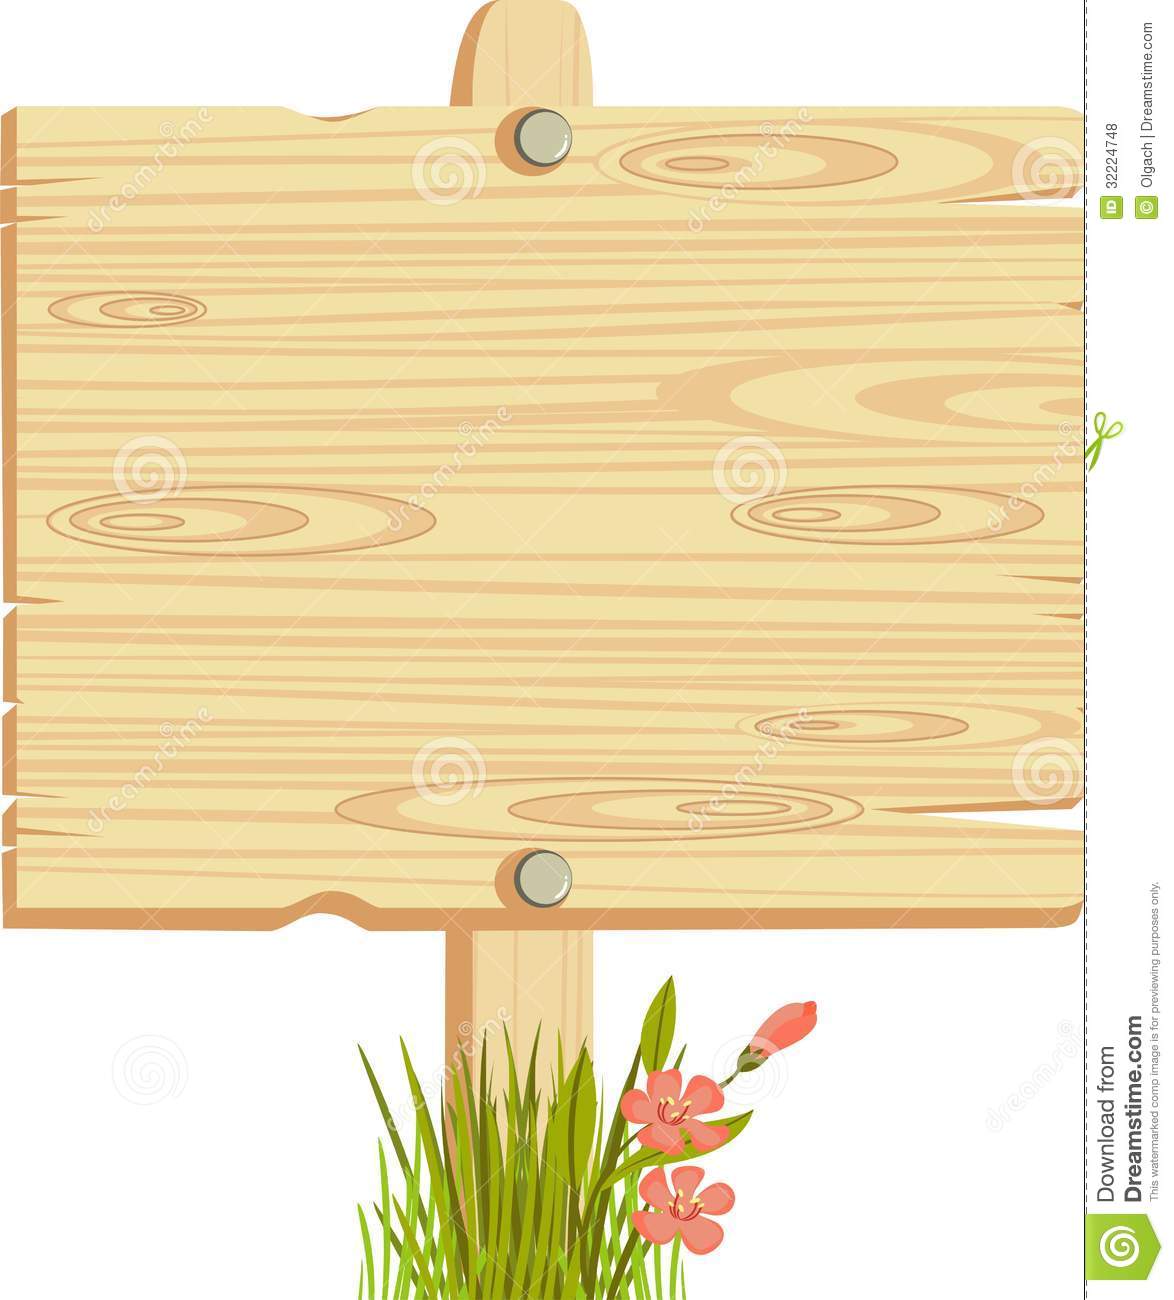 Wooden Sign Royalty Free Stock Photos   Image  32224748